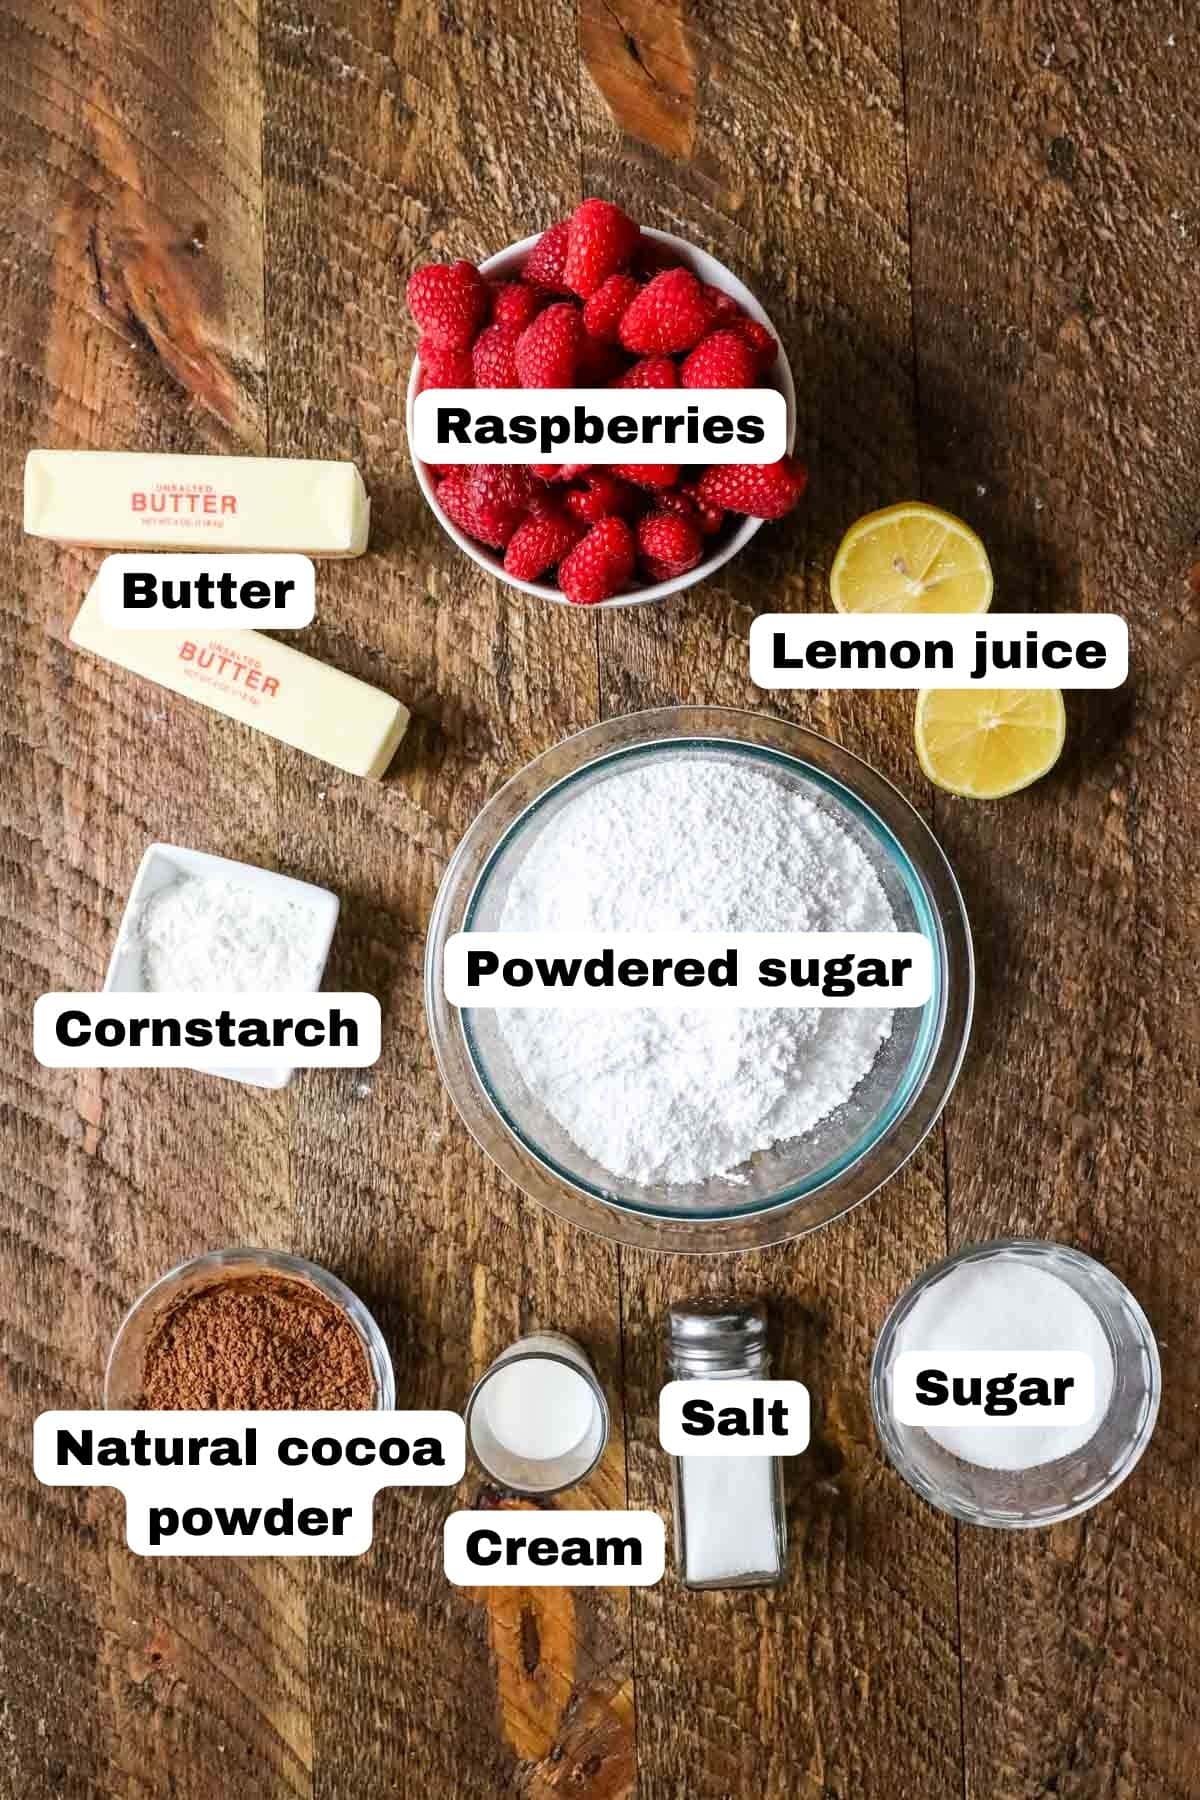 Overhead view of labelled ingredients including fresh raspberries, lemon halves, cocoa powder, and more.